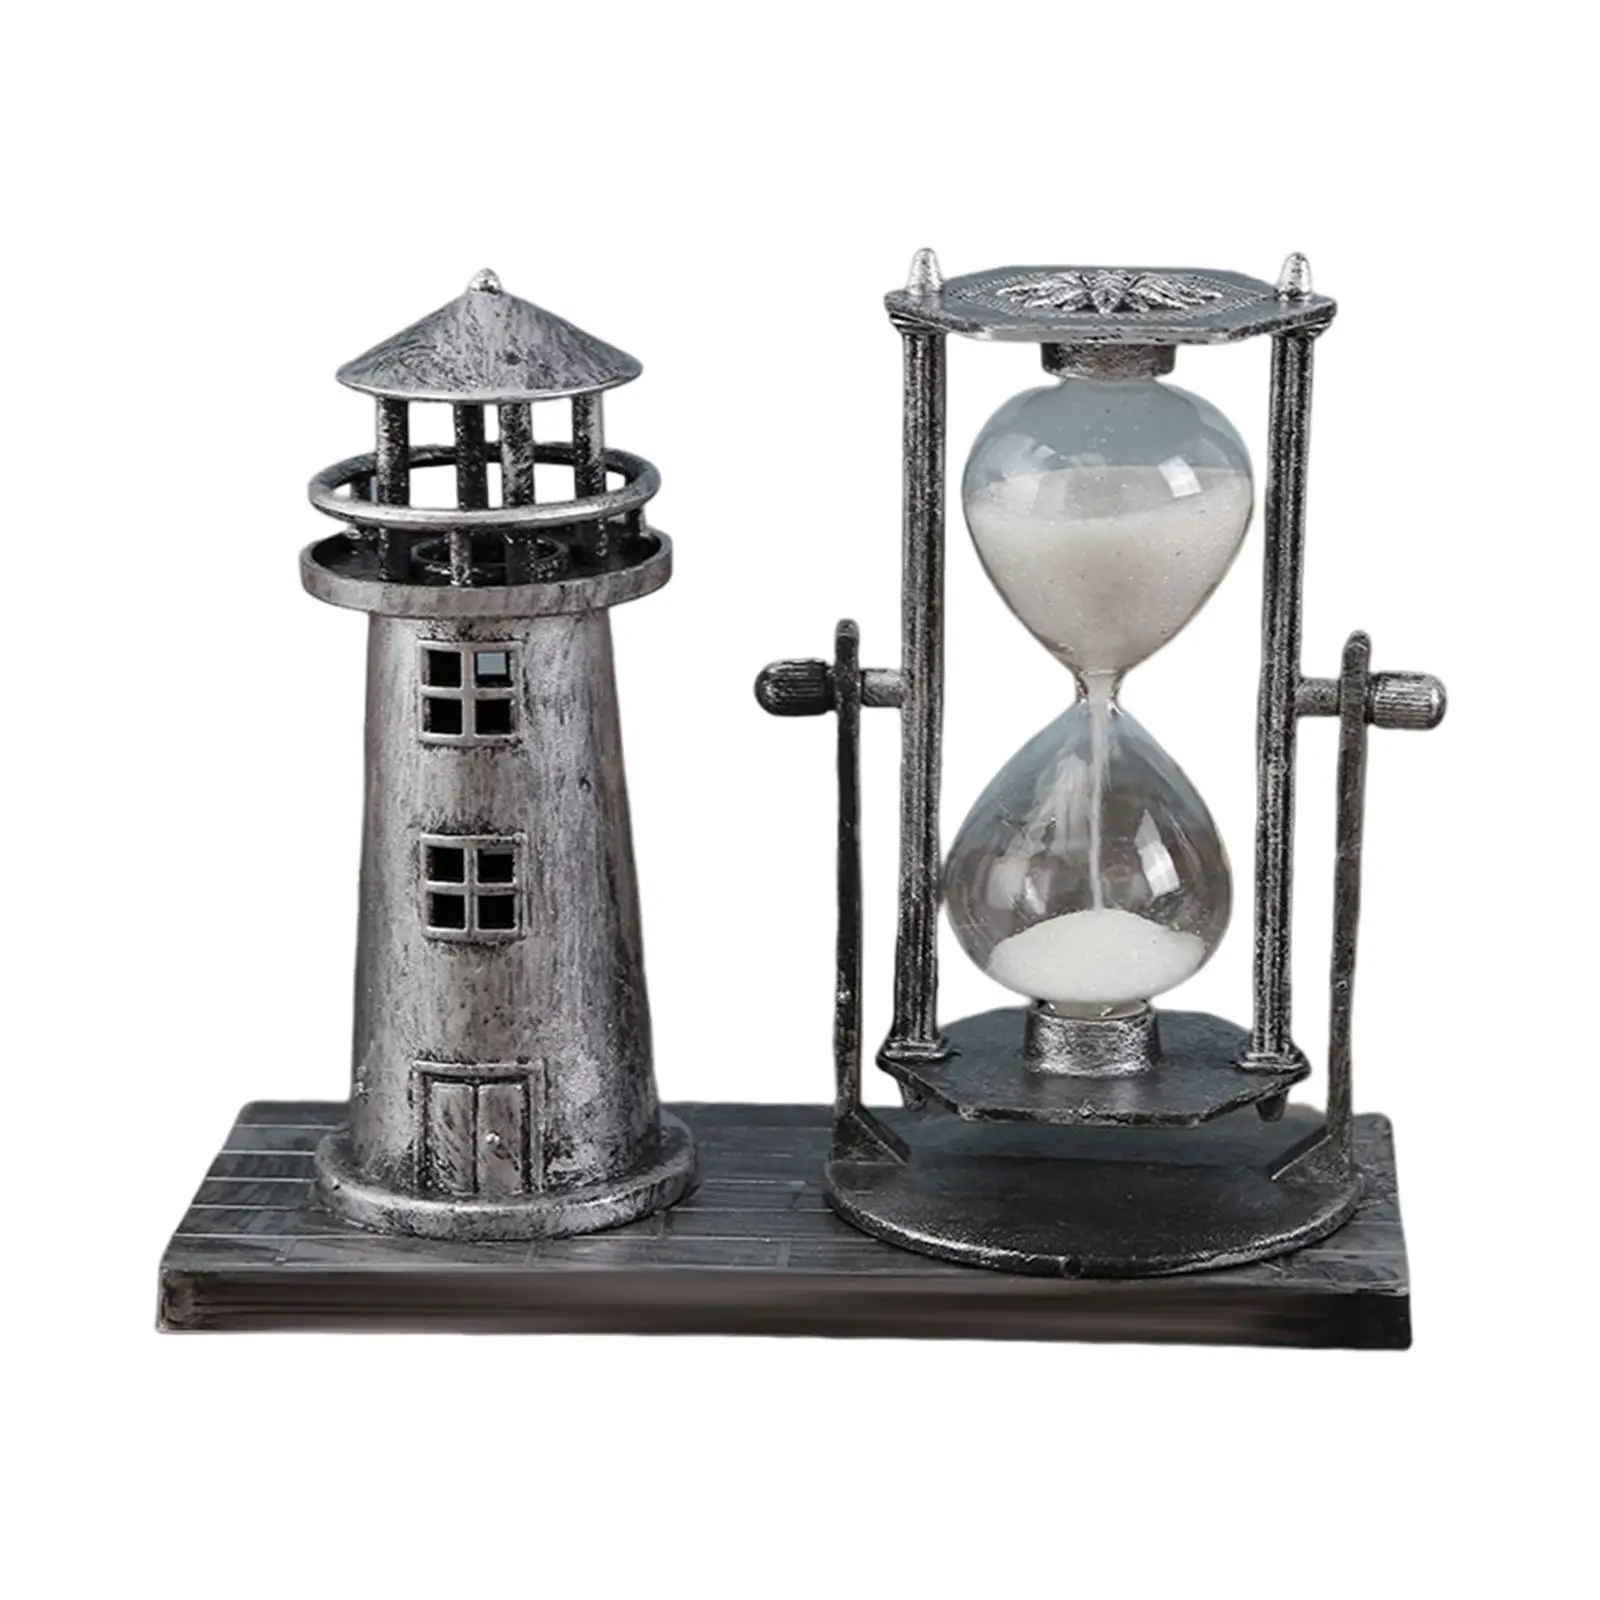 Retro Style Hourglass Sandglass Decor Lighthouse Tower Exquisite Sand Timer for Centerpieces Home Cabinet Living Room Office